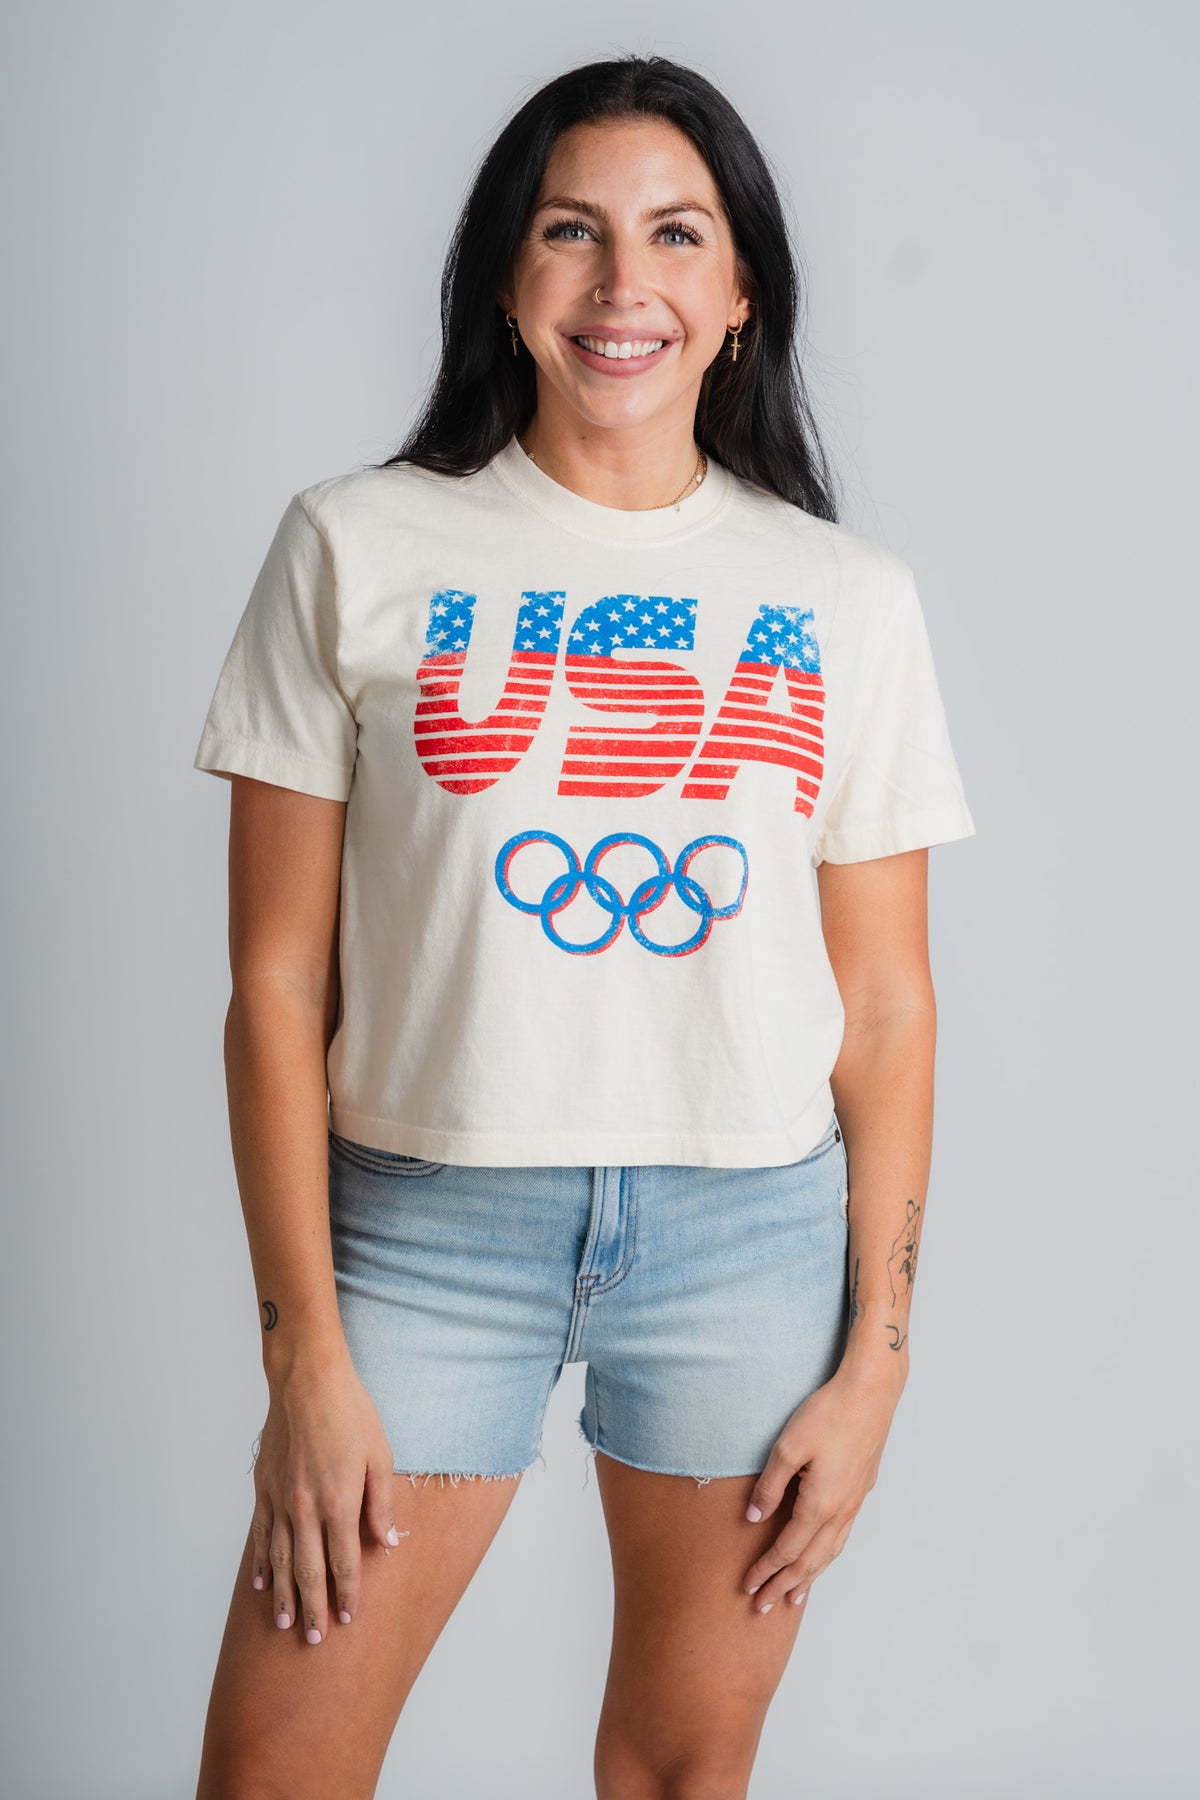 USA rings crop t-shirt - Trendy T-shirts - Cute American Summer Collection at Lush Fashion Lounge Boutique in Oklahoma City